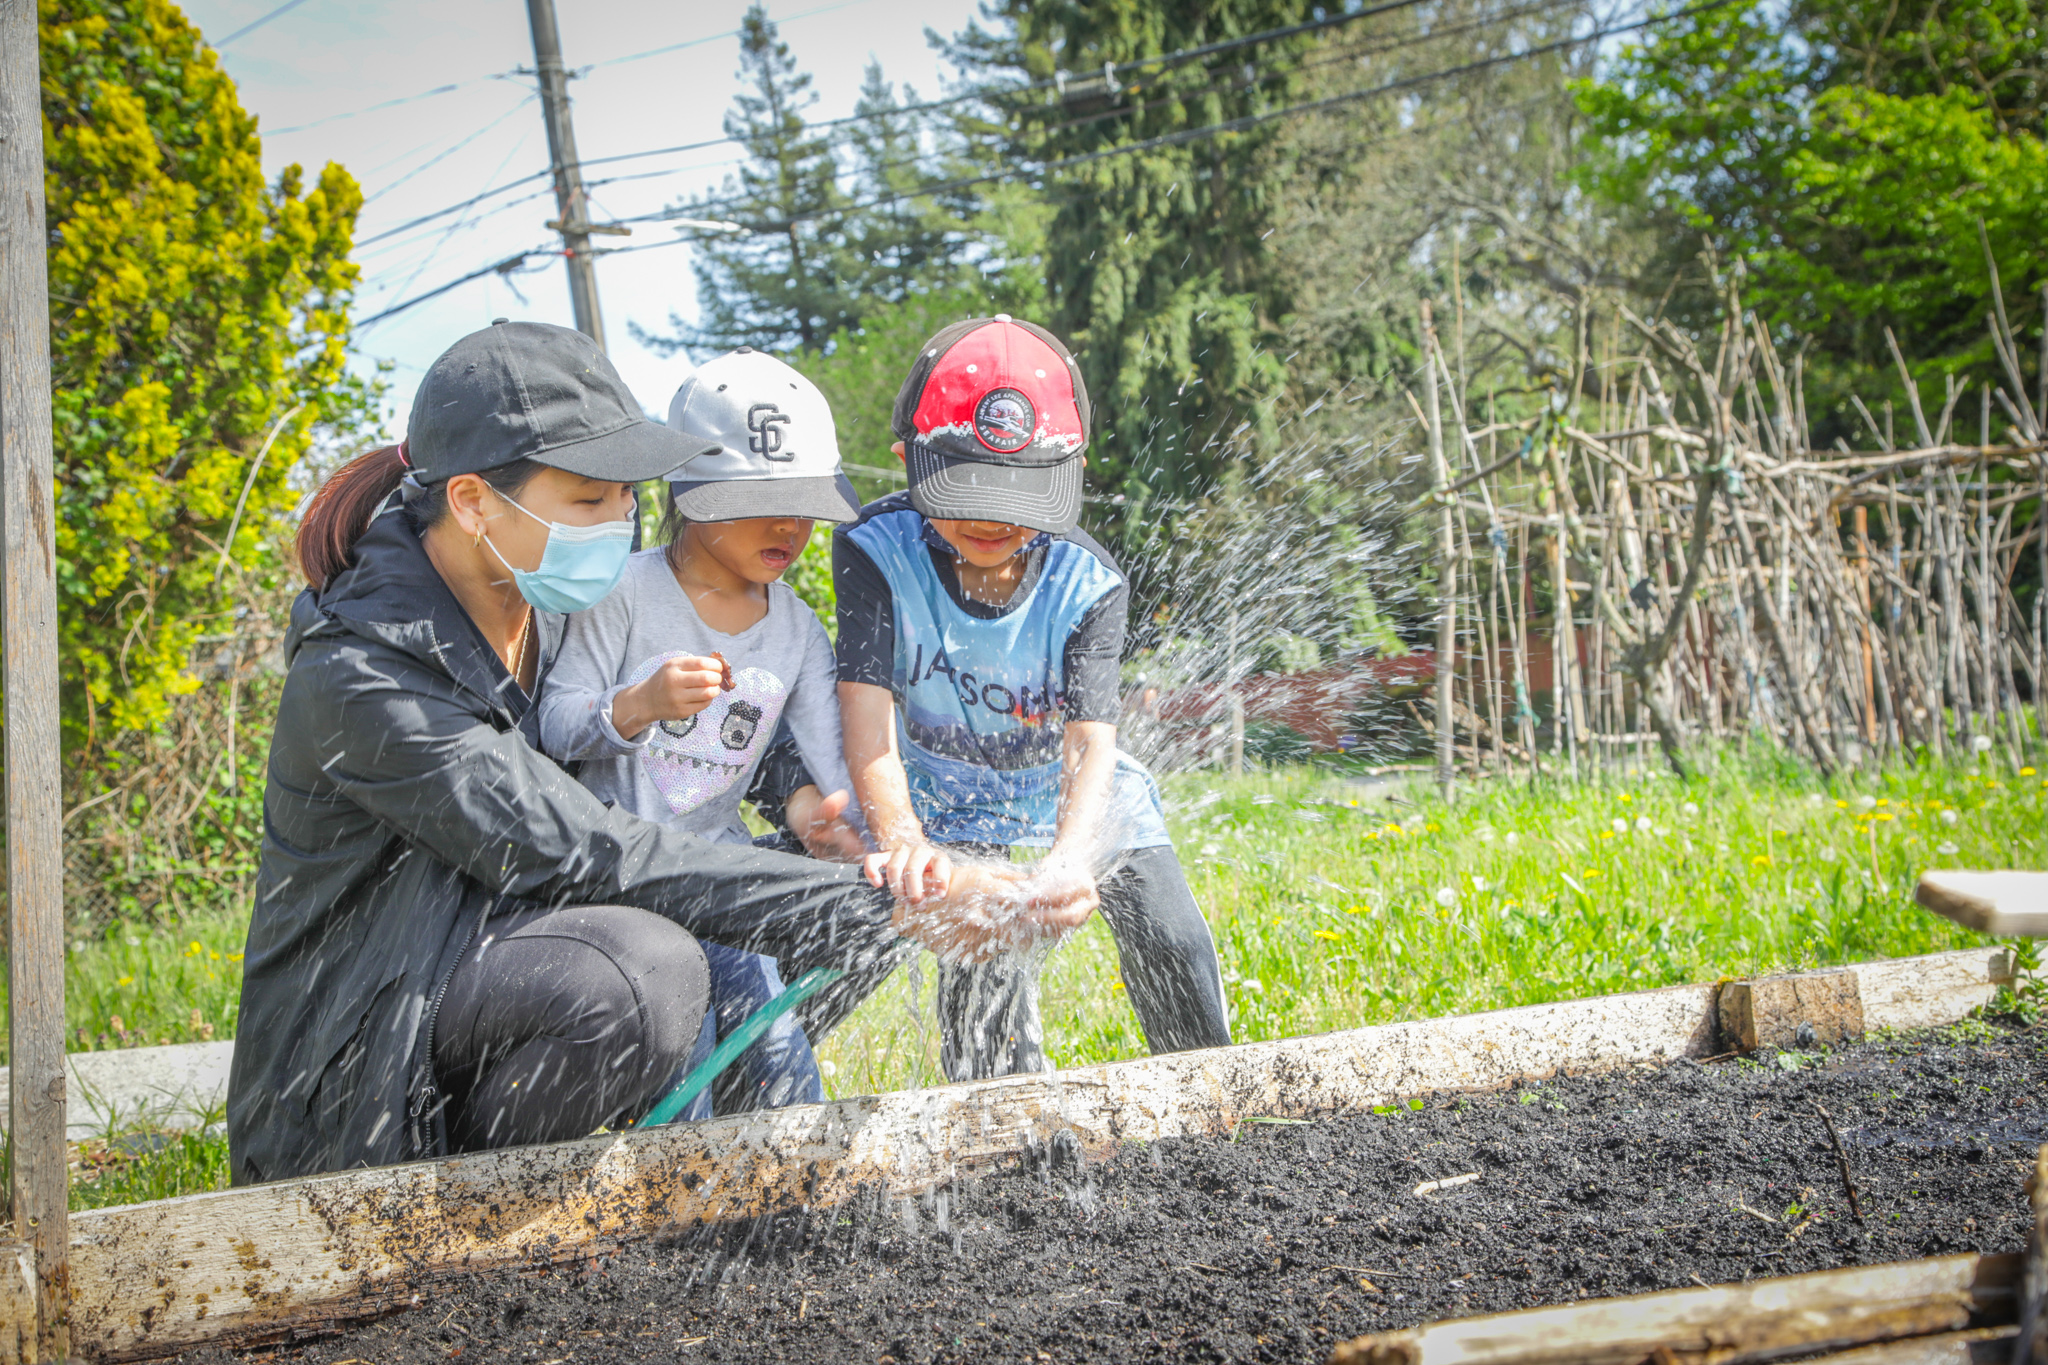 A mother wearing a baseball hat and face mask crouches next to a garden bed with her two children as they play with a spraying hose.